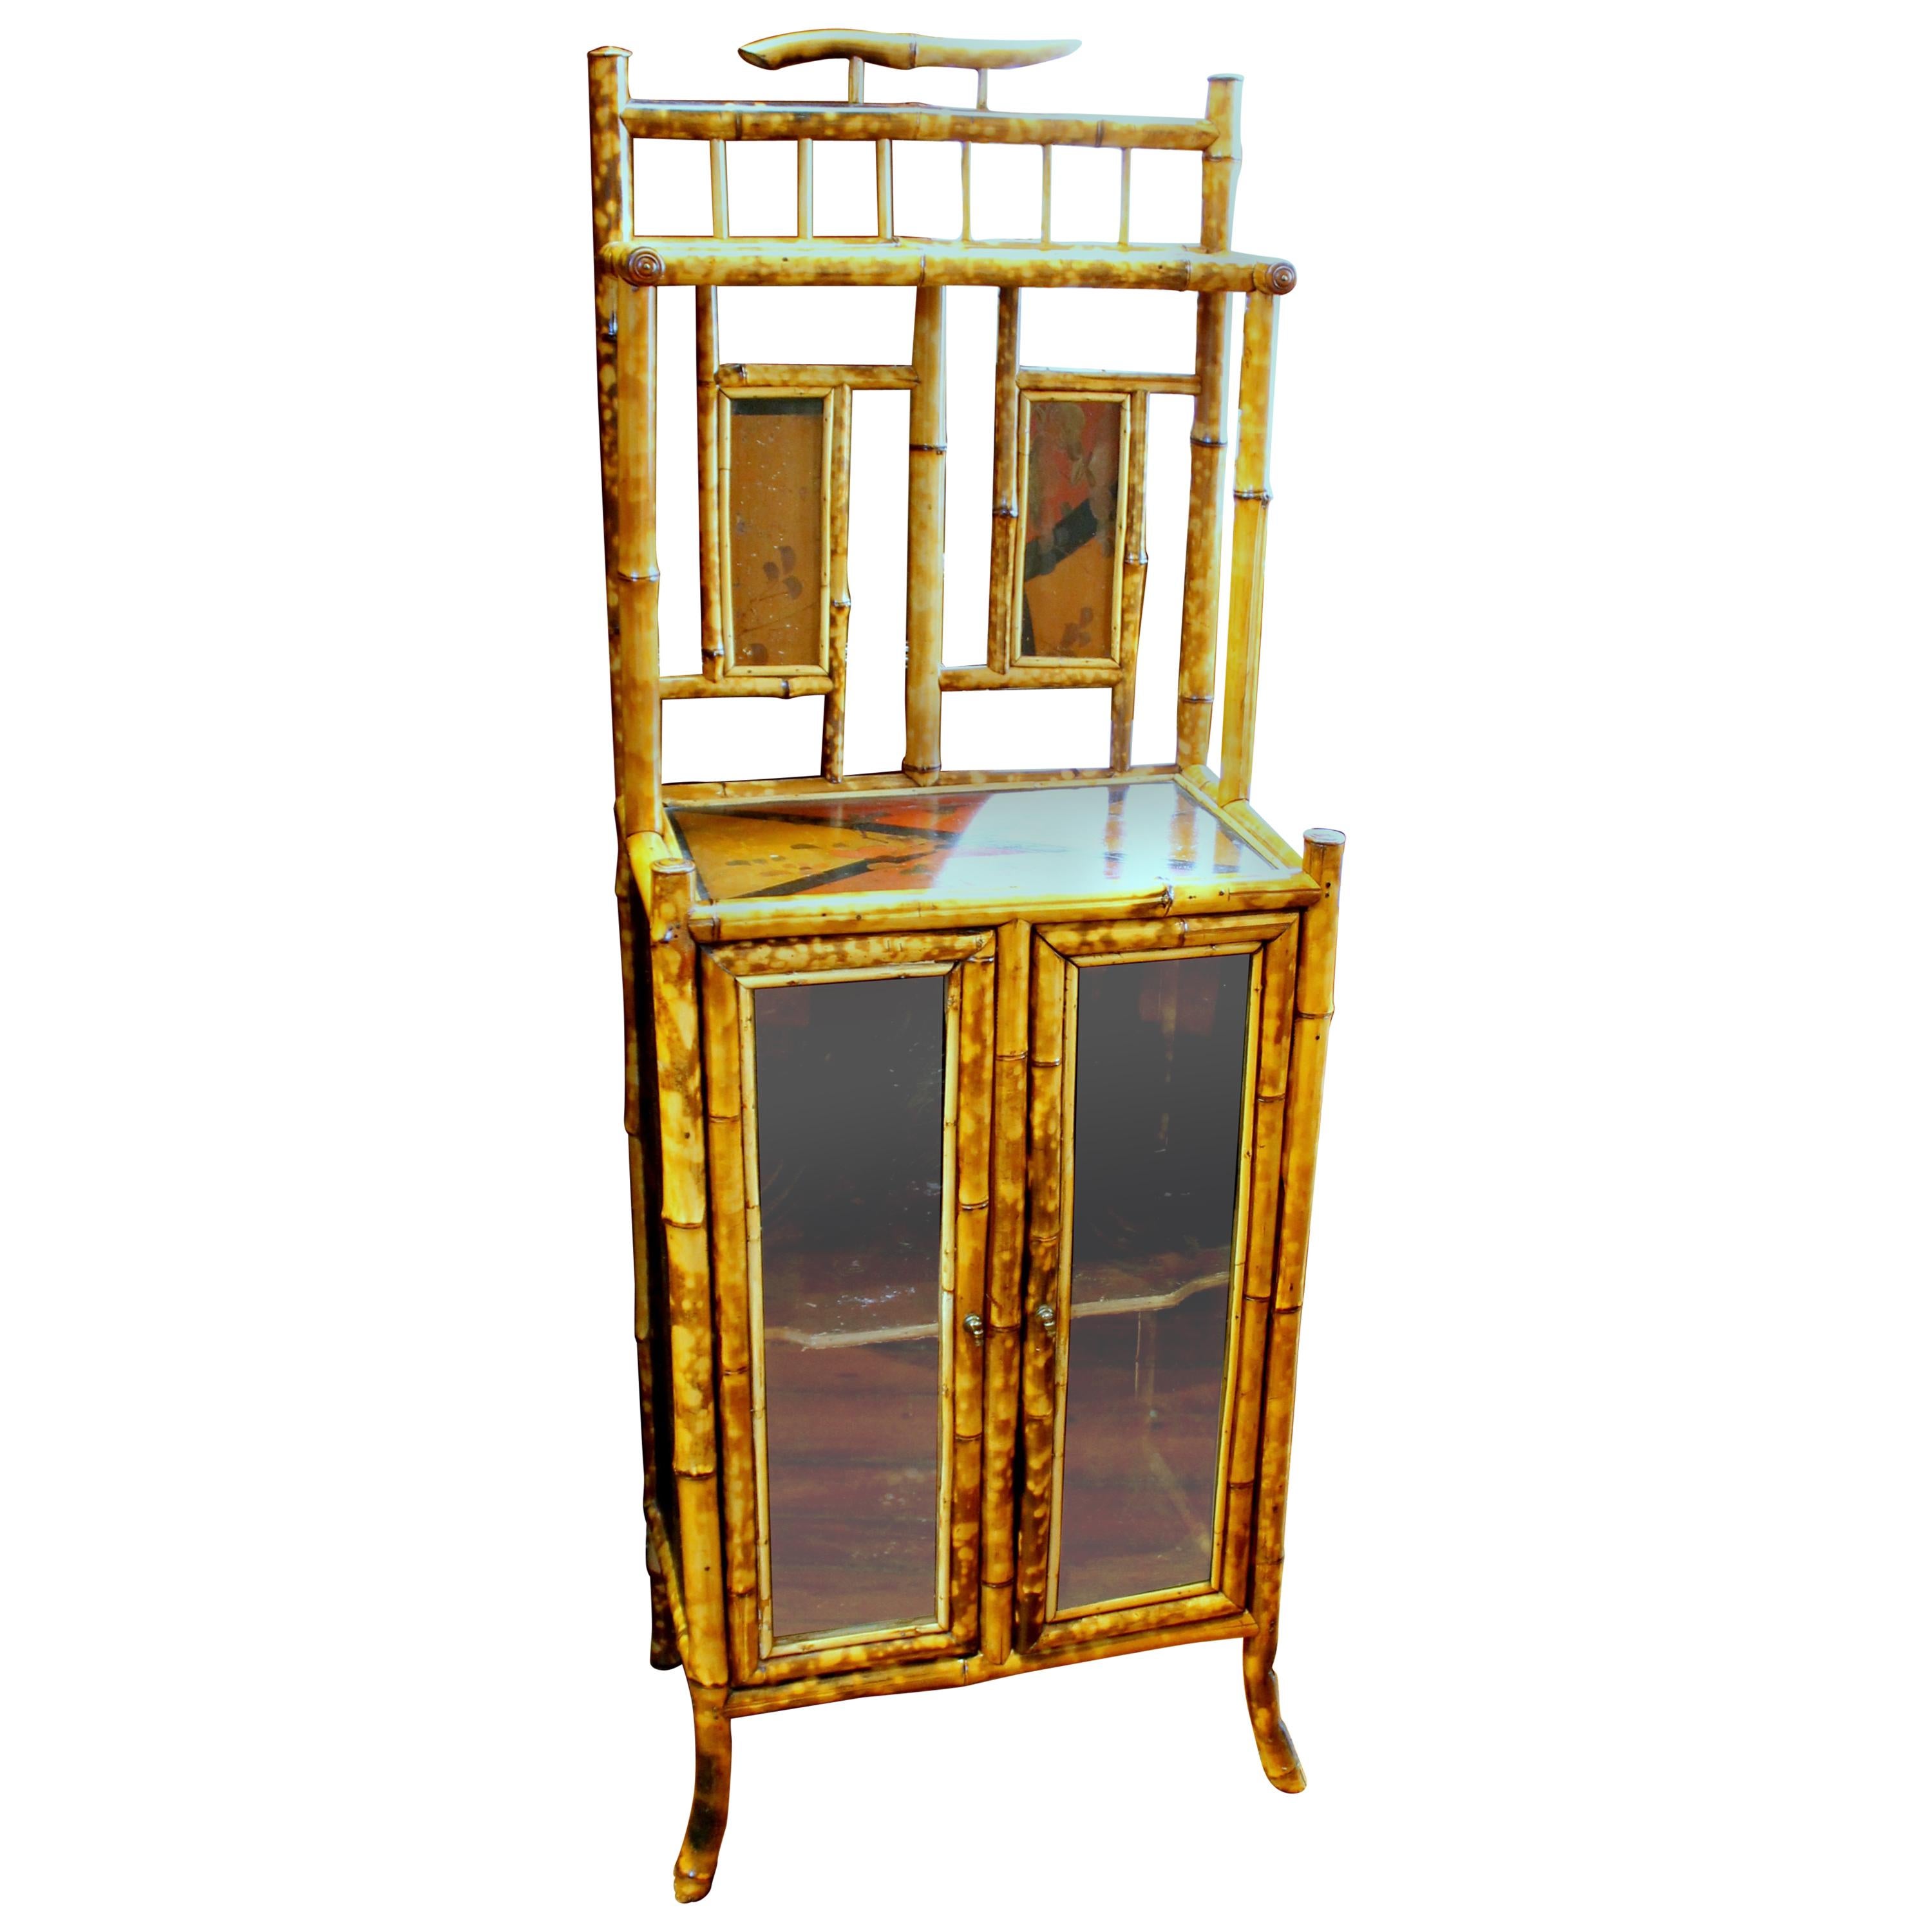 Antique English "Anglo-Japan" Victorian Hand Painted Two-Door Cabinet or Etagere